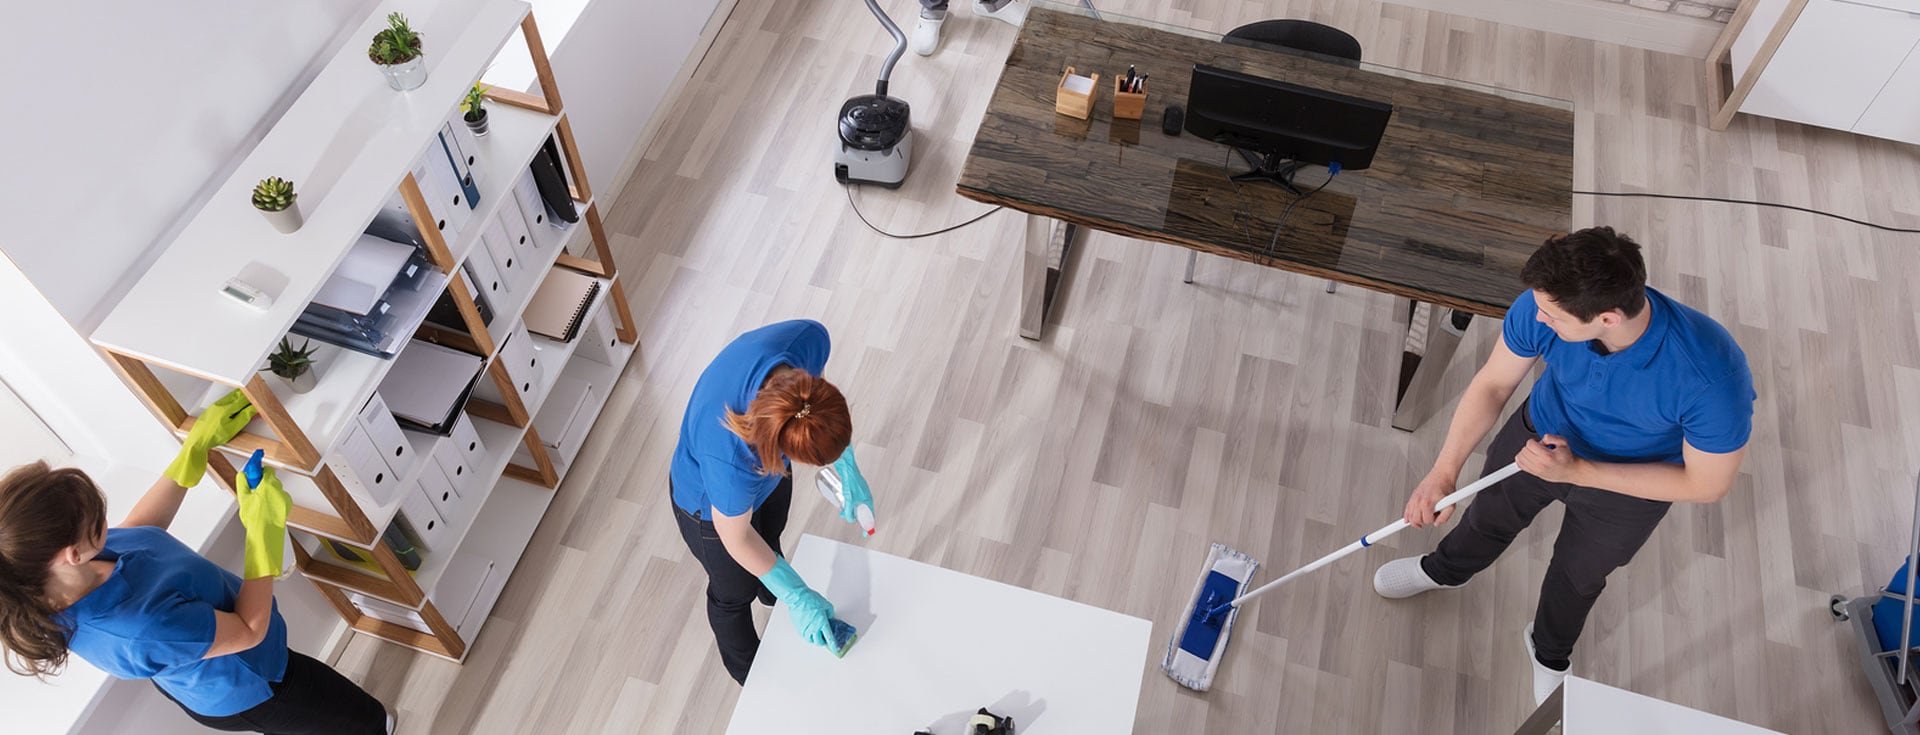 Residential Cleaning Services in El Paso-Glow Up Clean INC, US, home cleaning services